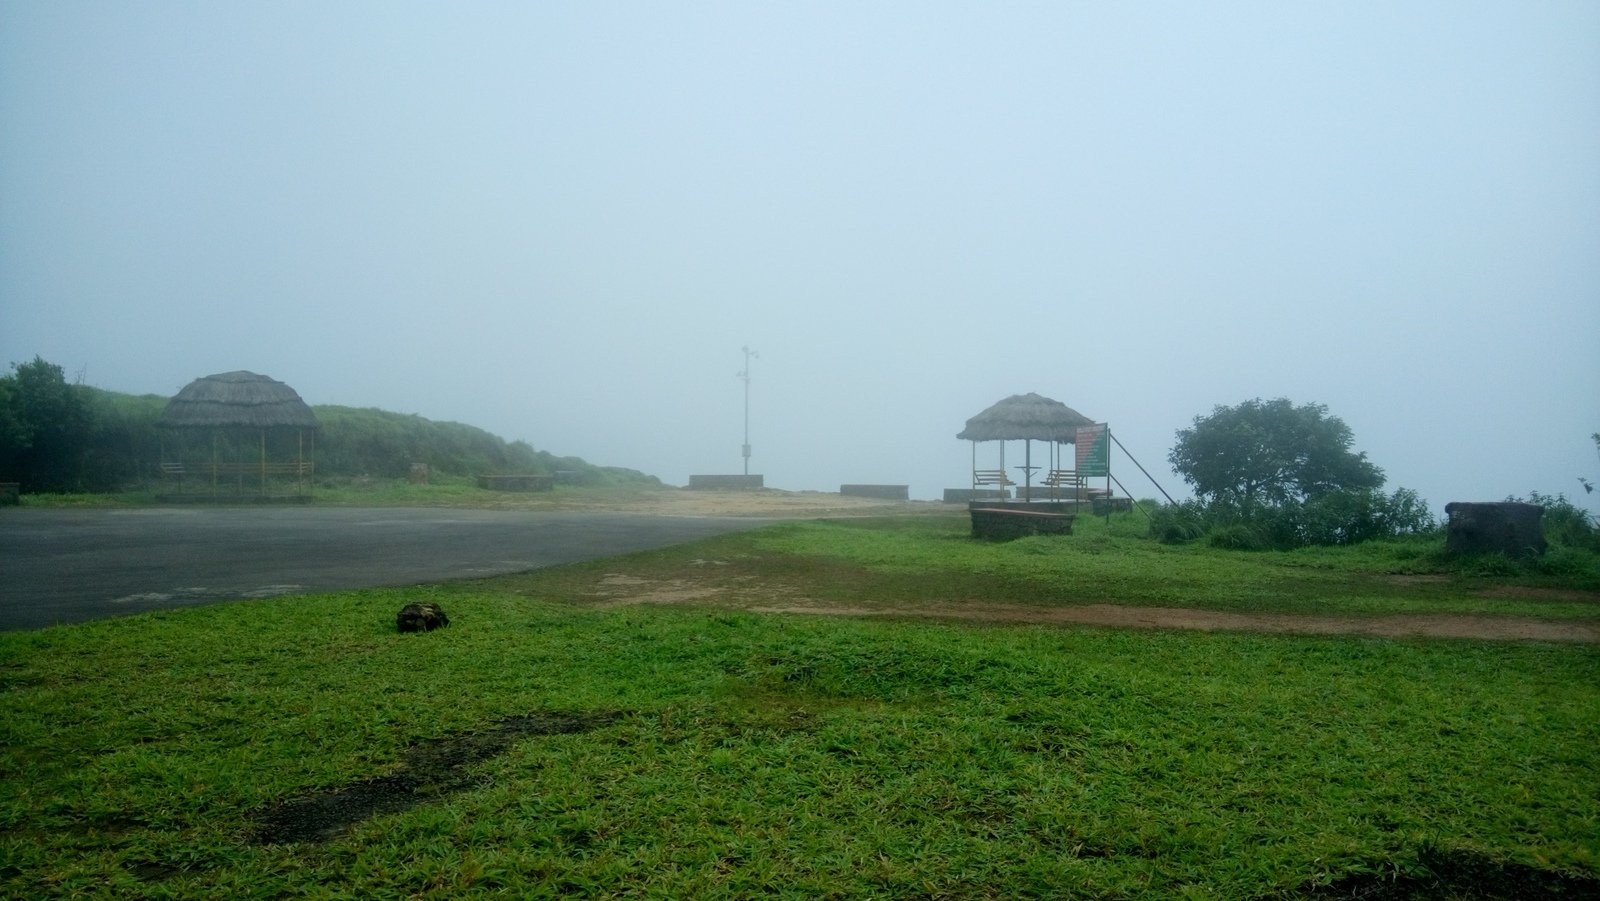 a foggy and grassy area with benches, and huts